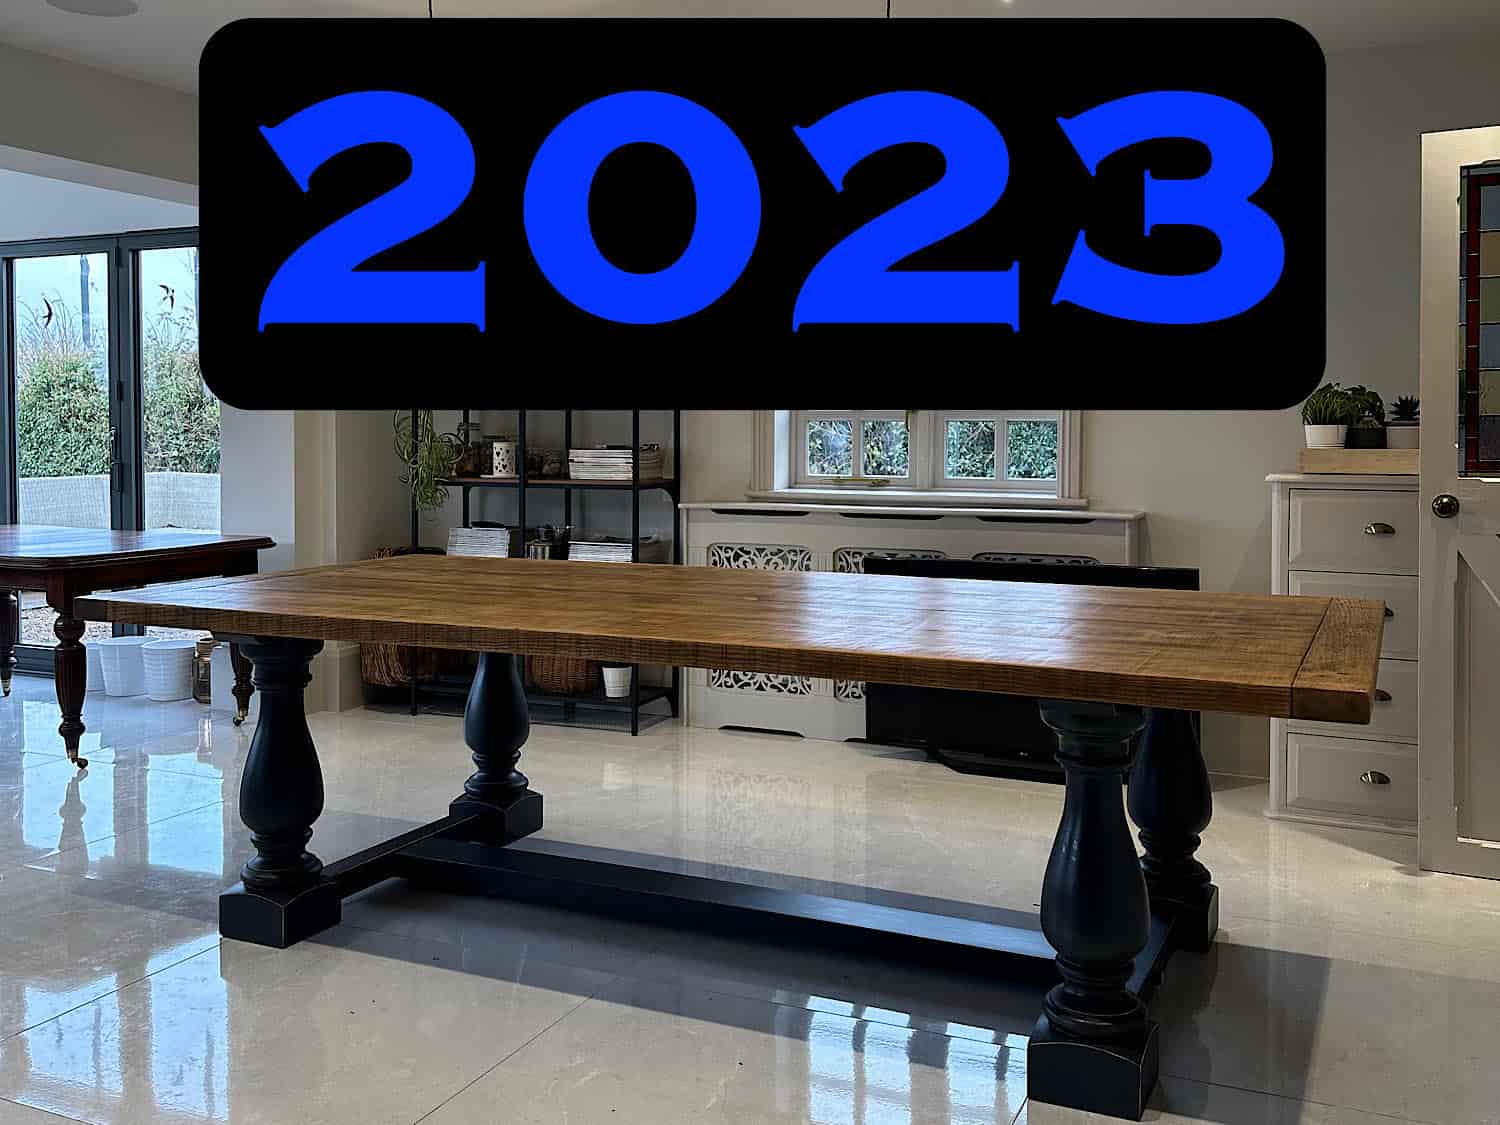 The Top 5 Dining Table Trends for 2023